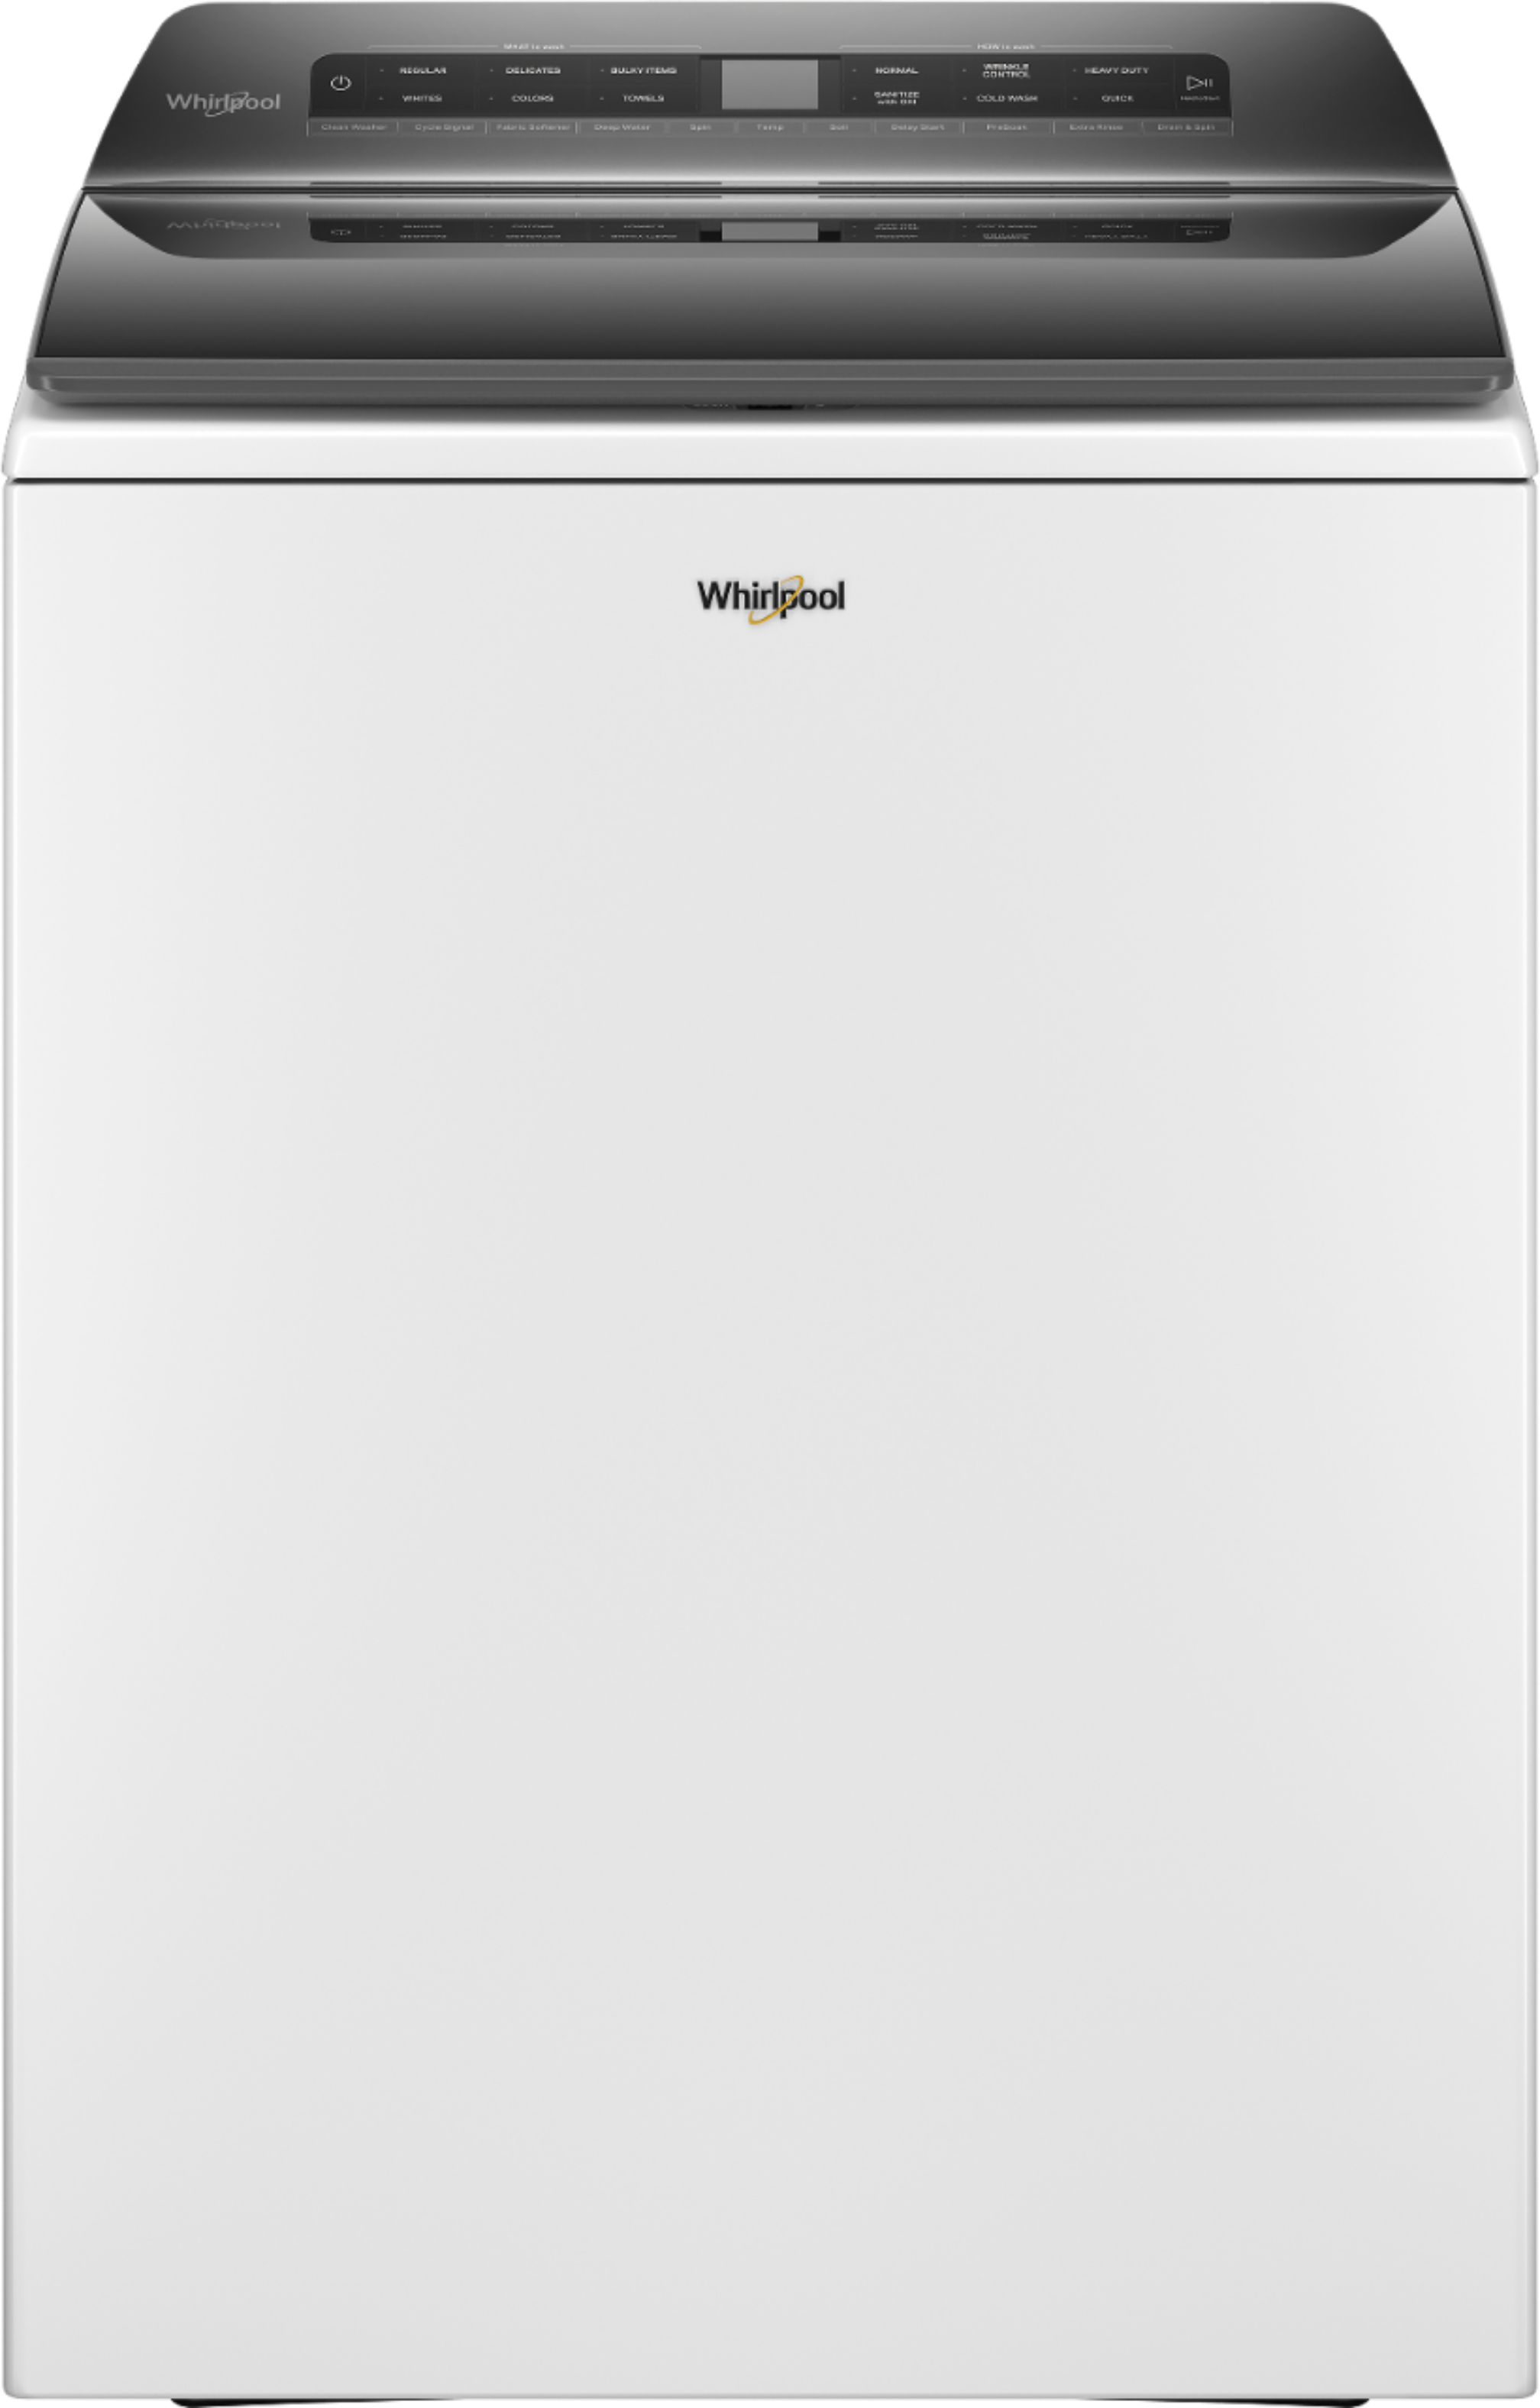 Whirlpool 4 7 Cu Ft Top Load Washer With Pretreat Station White Wtw5105hw Best Buy